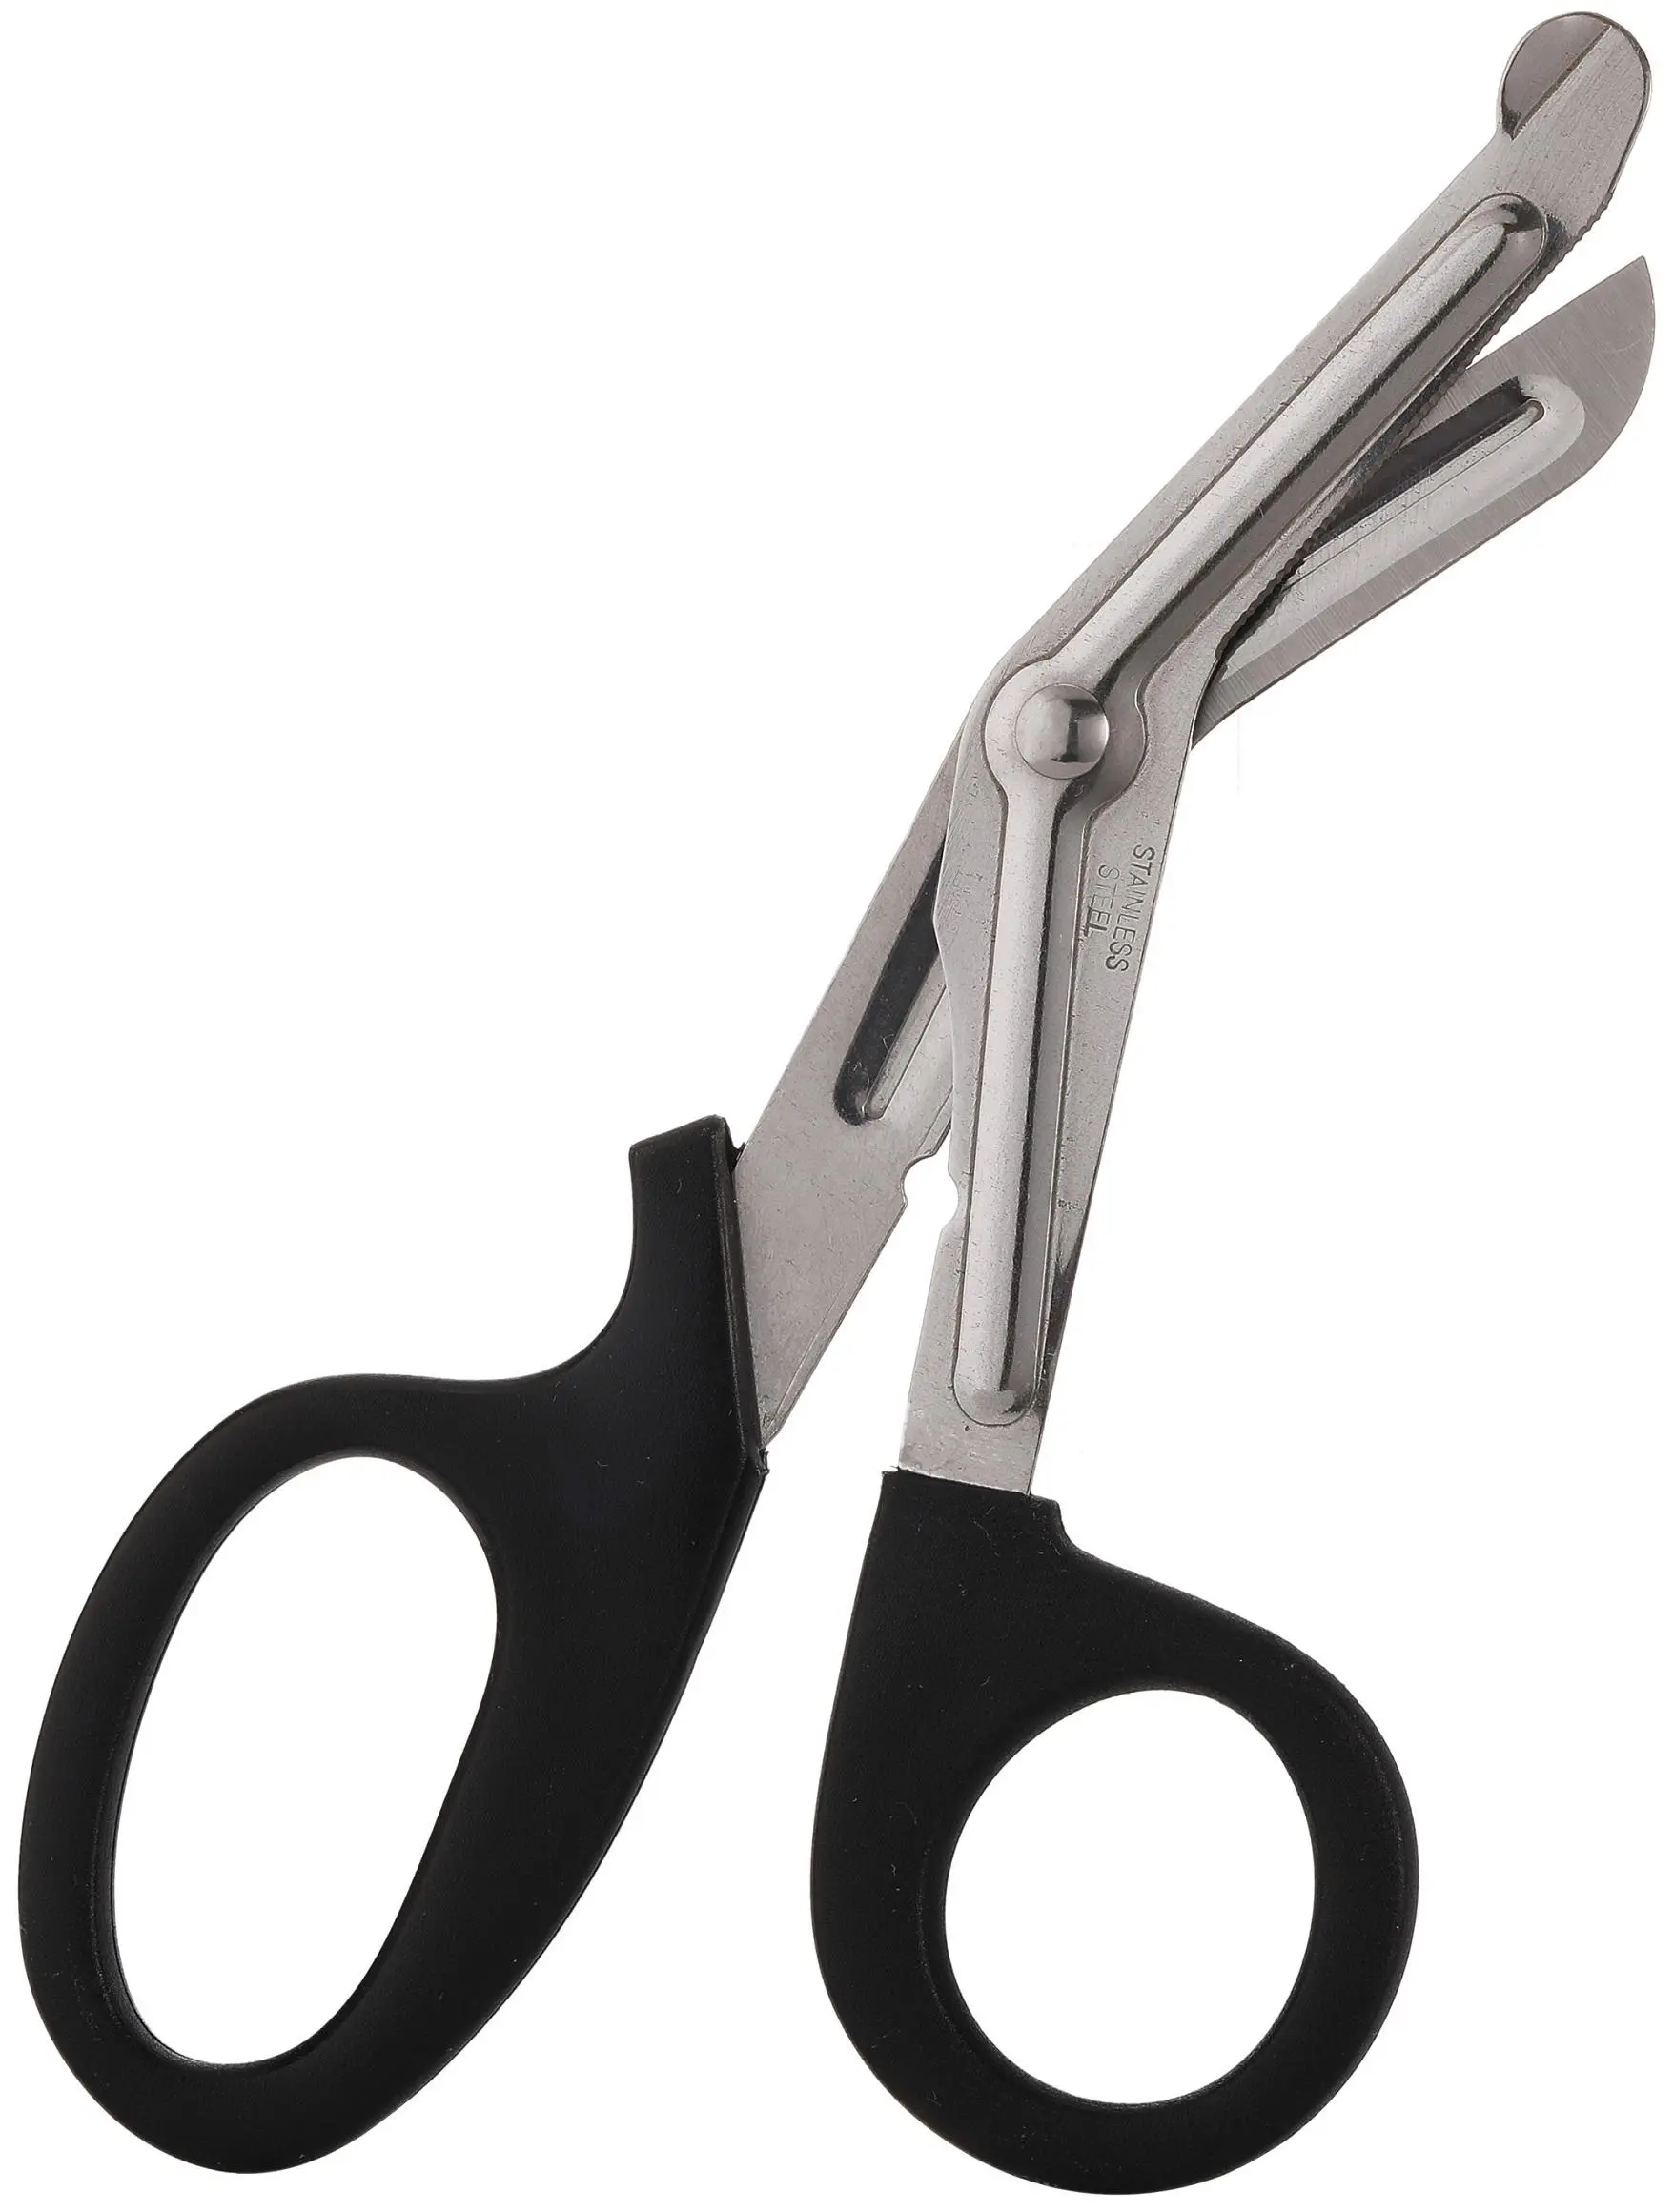 Why are bandage scissors curved